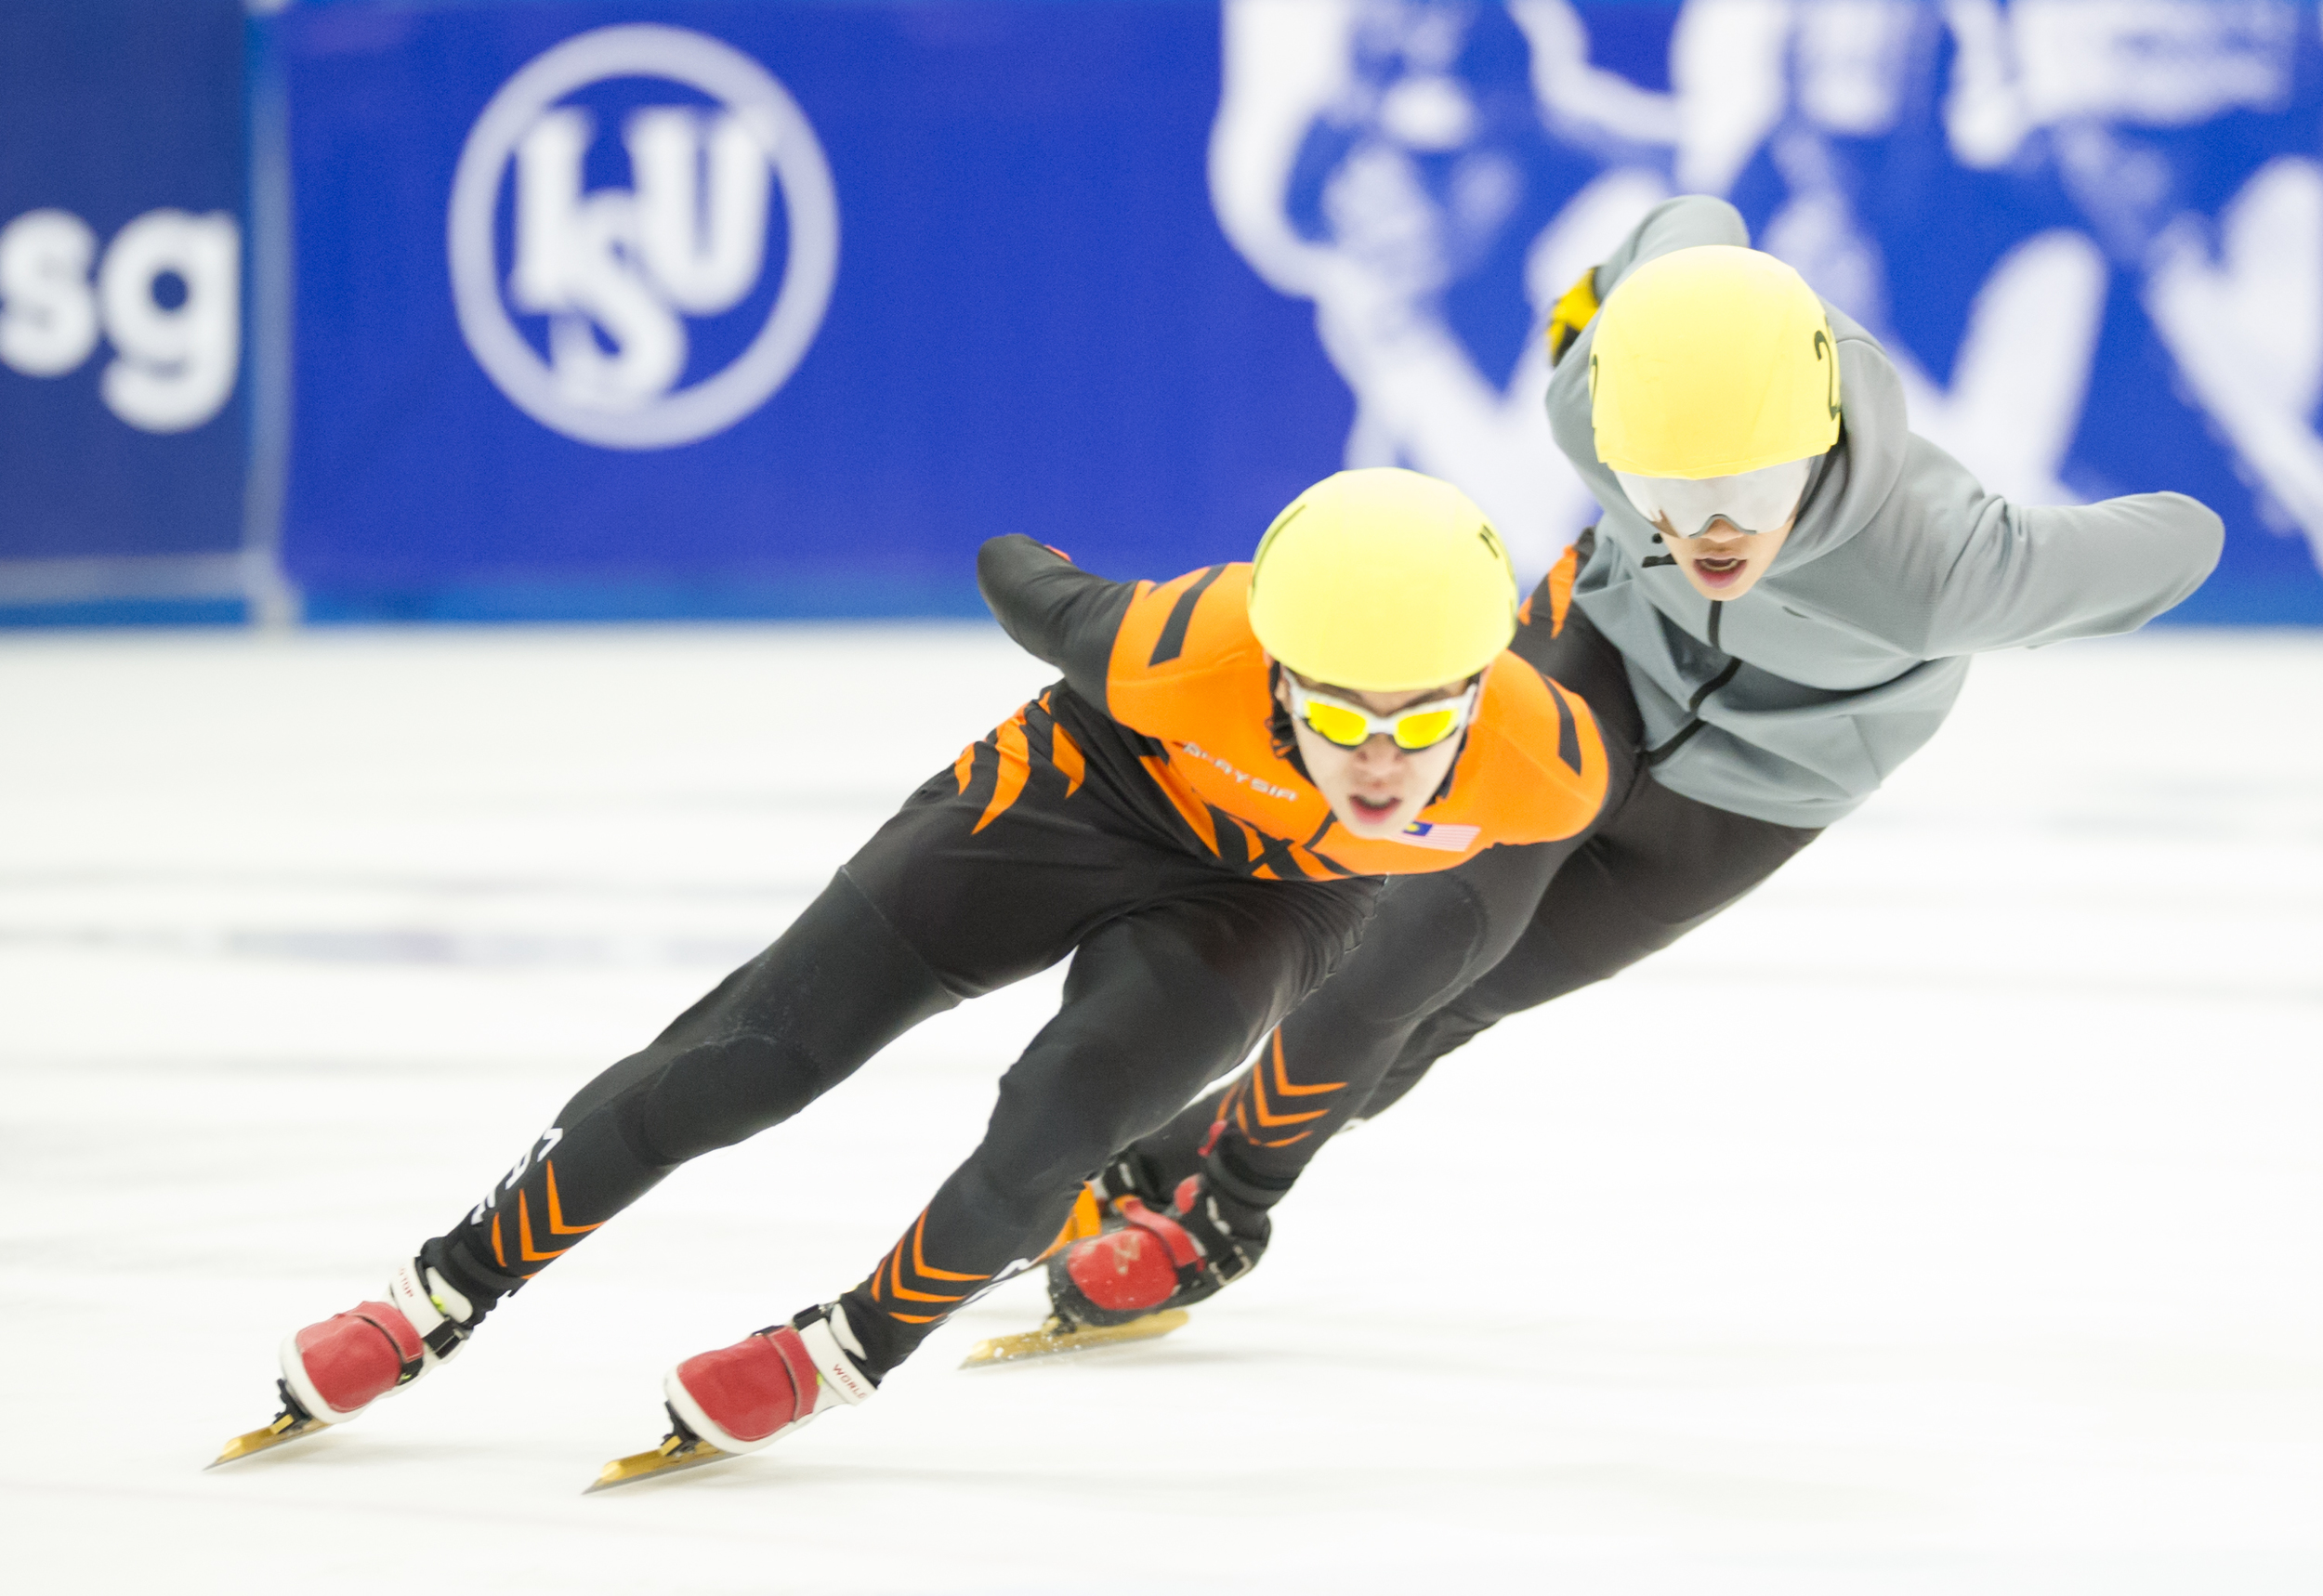 Two Malaysian speed skaters edge on the ice during the Tri-series SEA cup at the Rink.